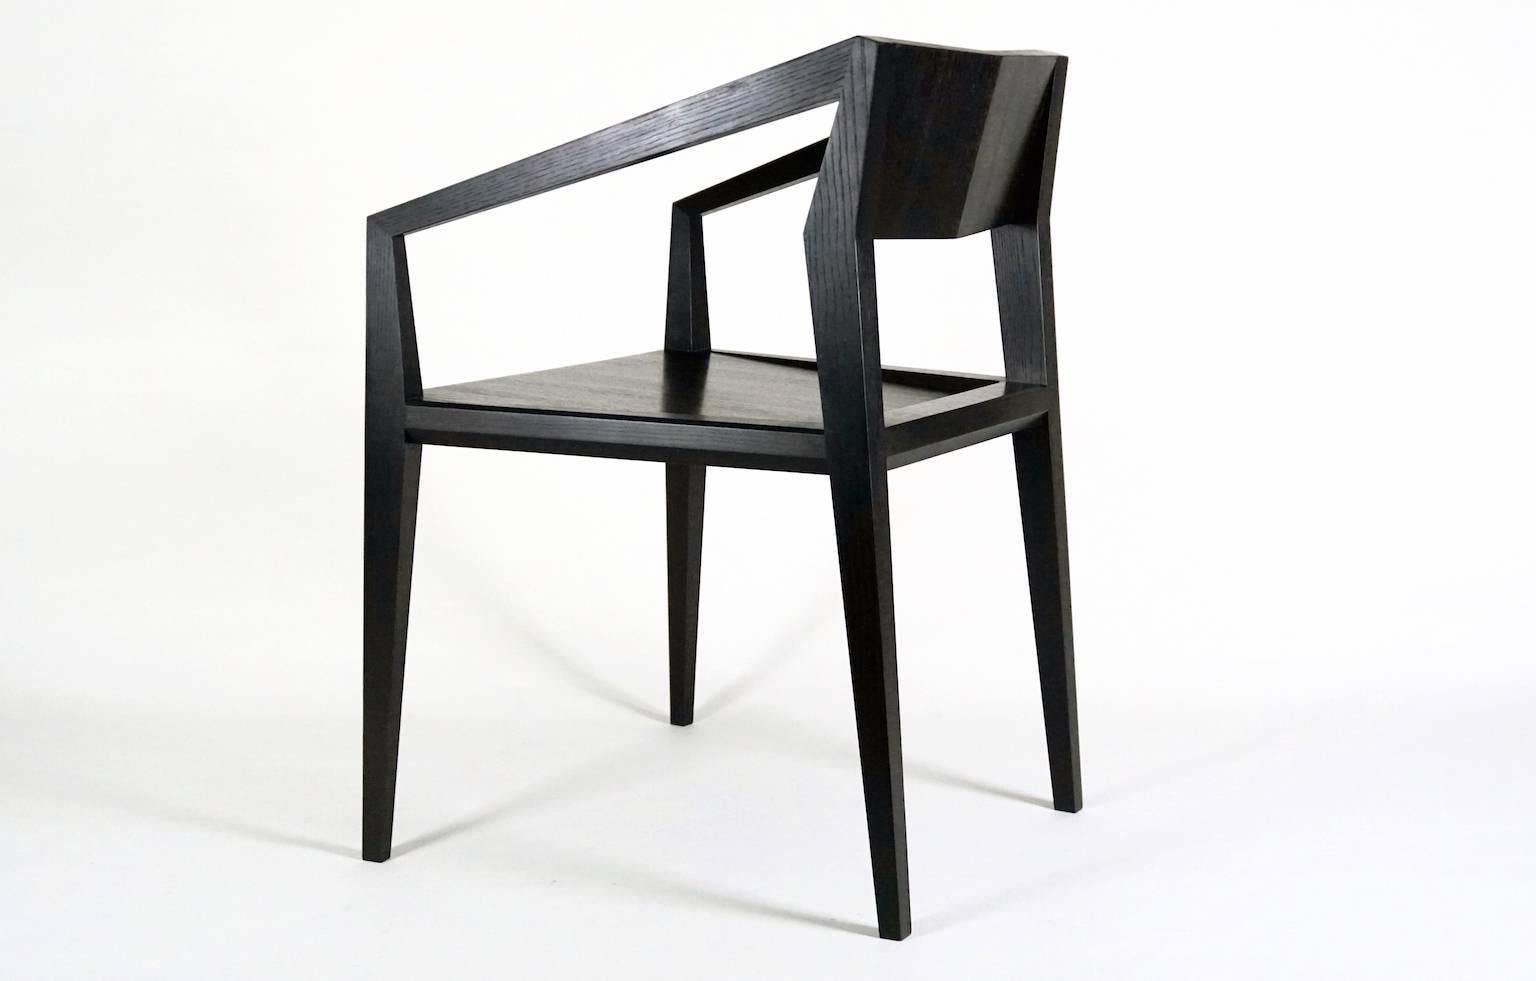 Geometric chair constructed solely out of solid wood featuring faceted legs and arms and a scooped seat. Arms feature exposed spline detail and chamfered edges. 

This chair was designed with experimental joinery combining a Maloof joint and Mortise